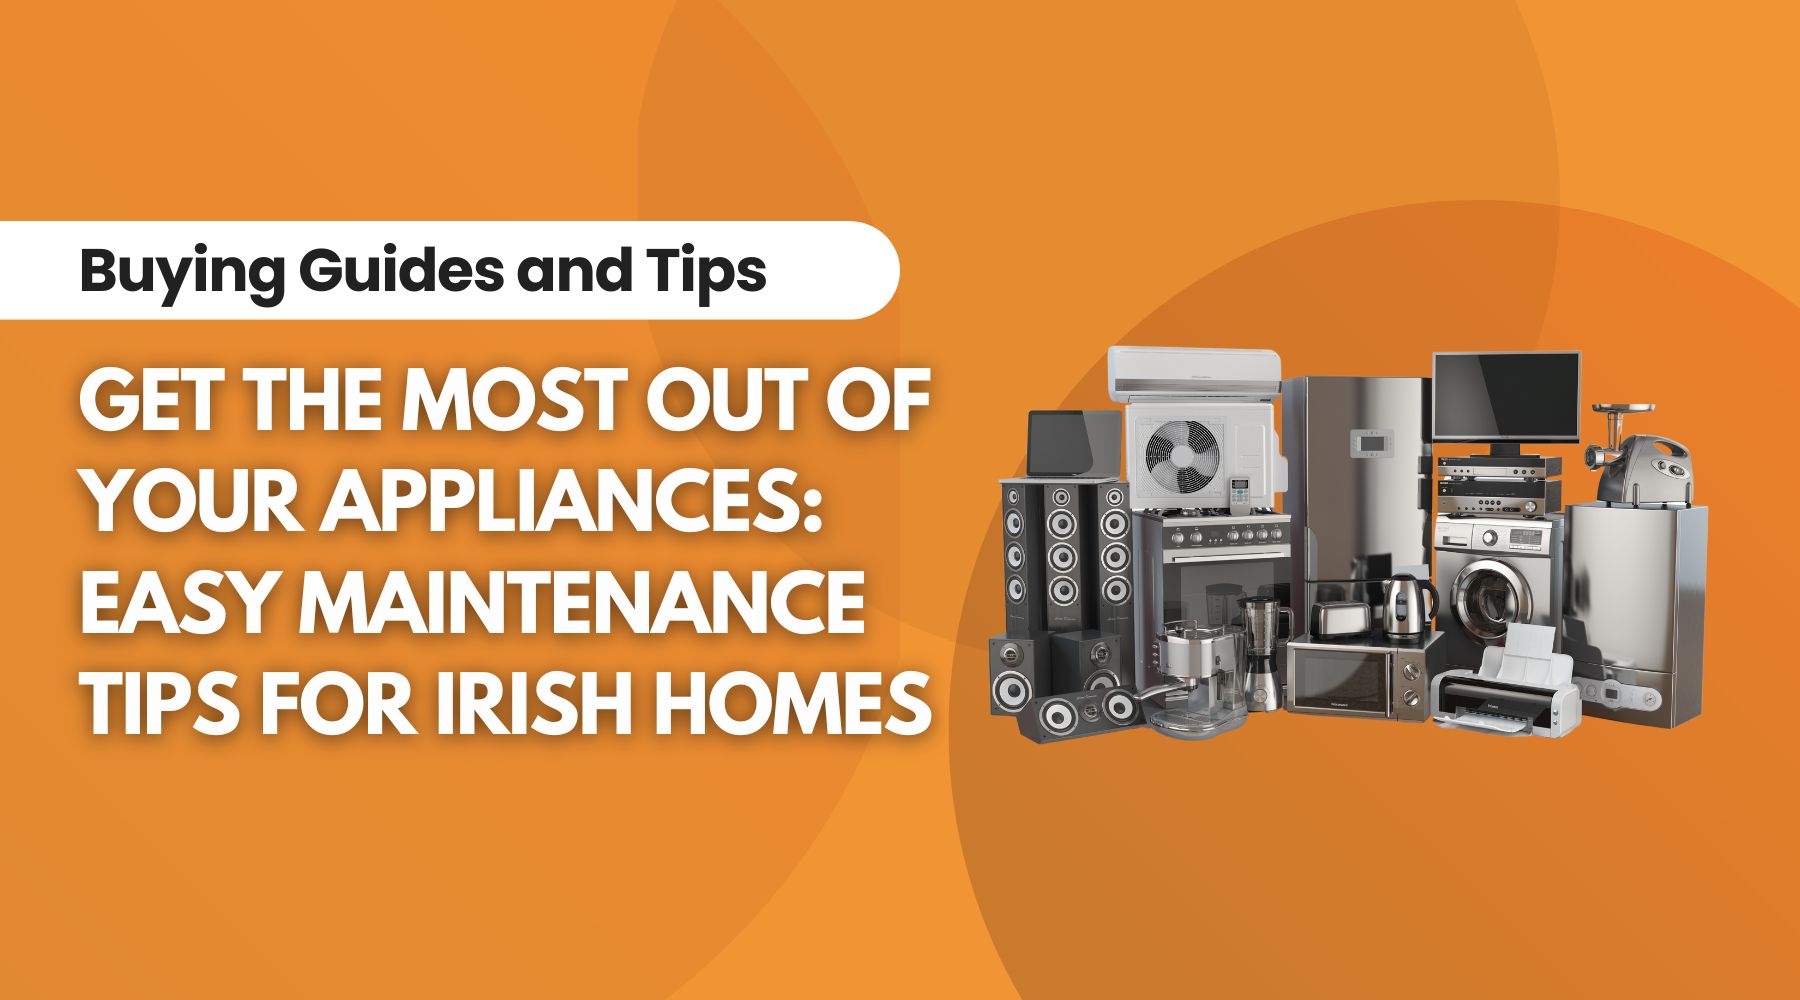  Get the Most Out of Your Appliances: Easy Maintenance Tips for Irish Homes